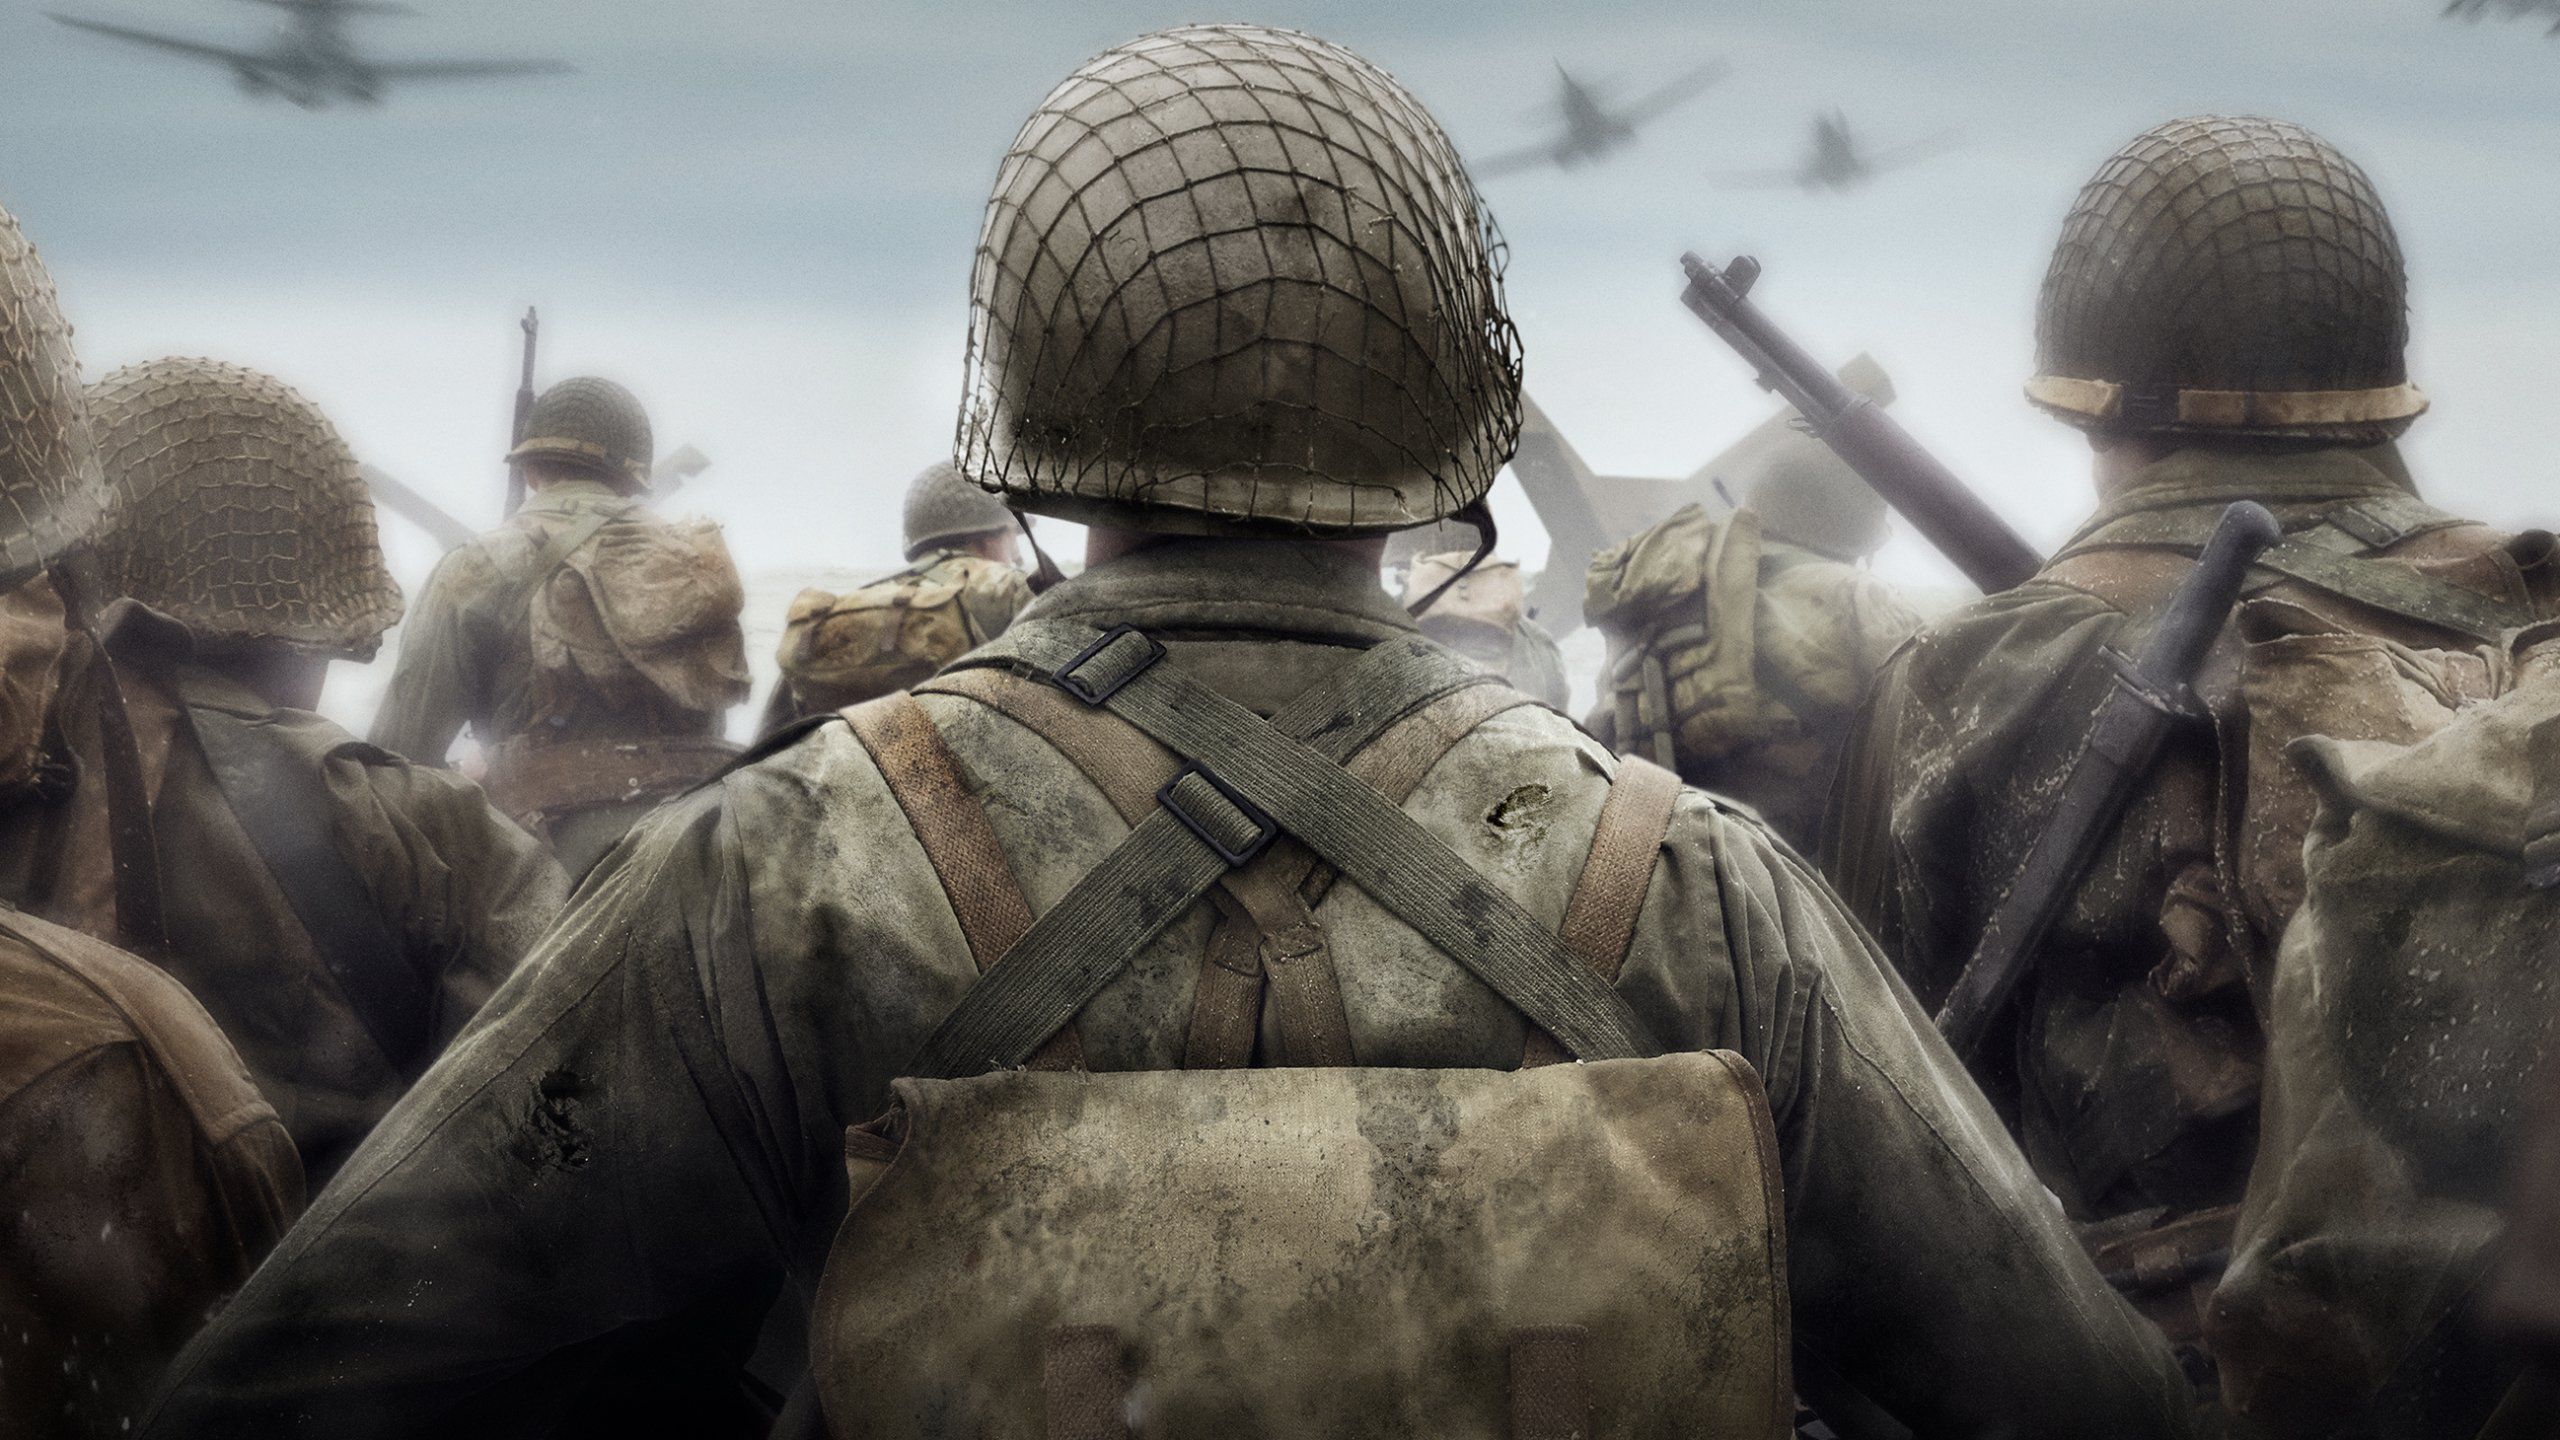 Call Of Duty Vanguard Is Coming To Current And Next Gen Consoles With A Setting 'fans Know And Love'